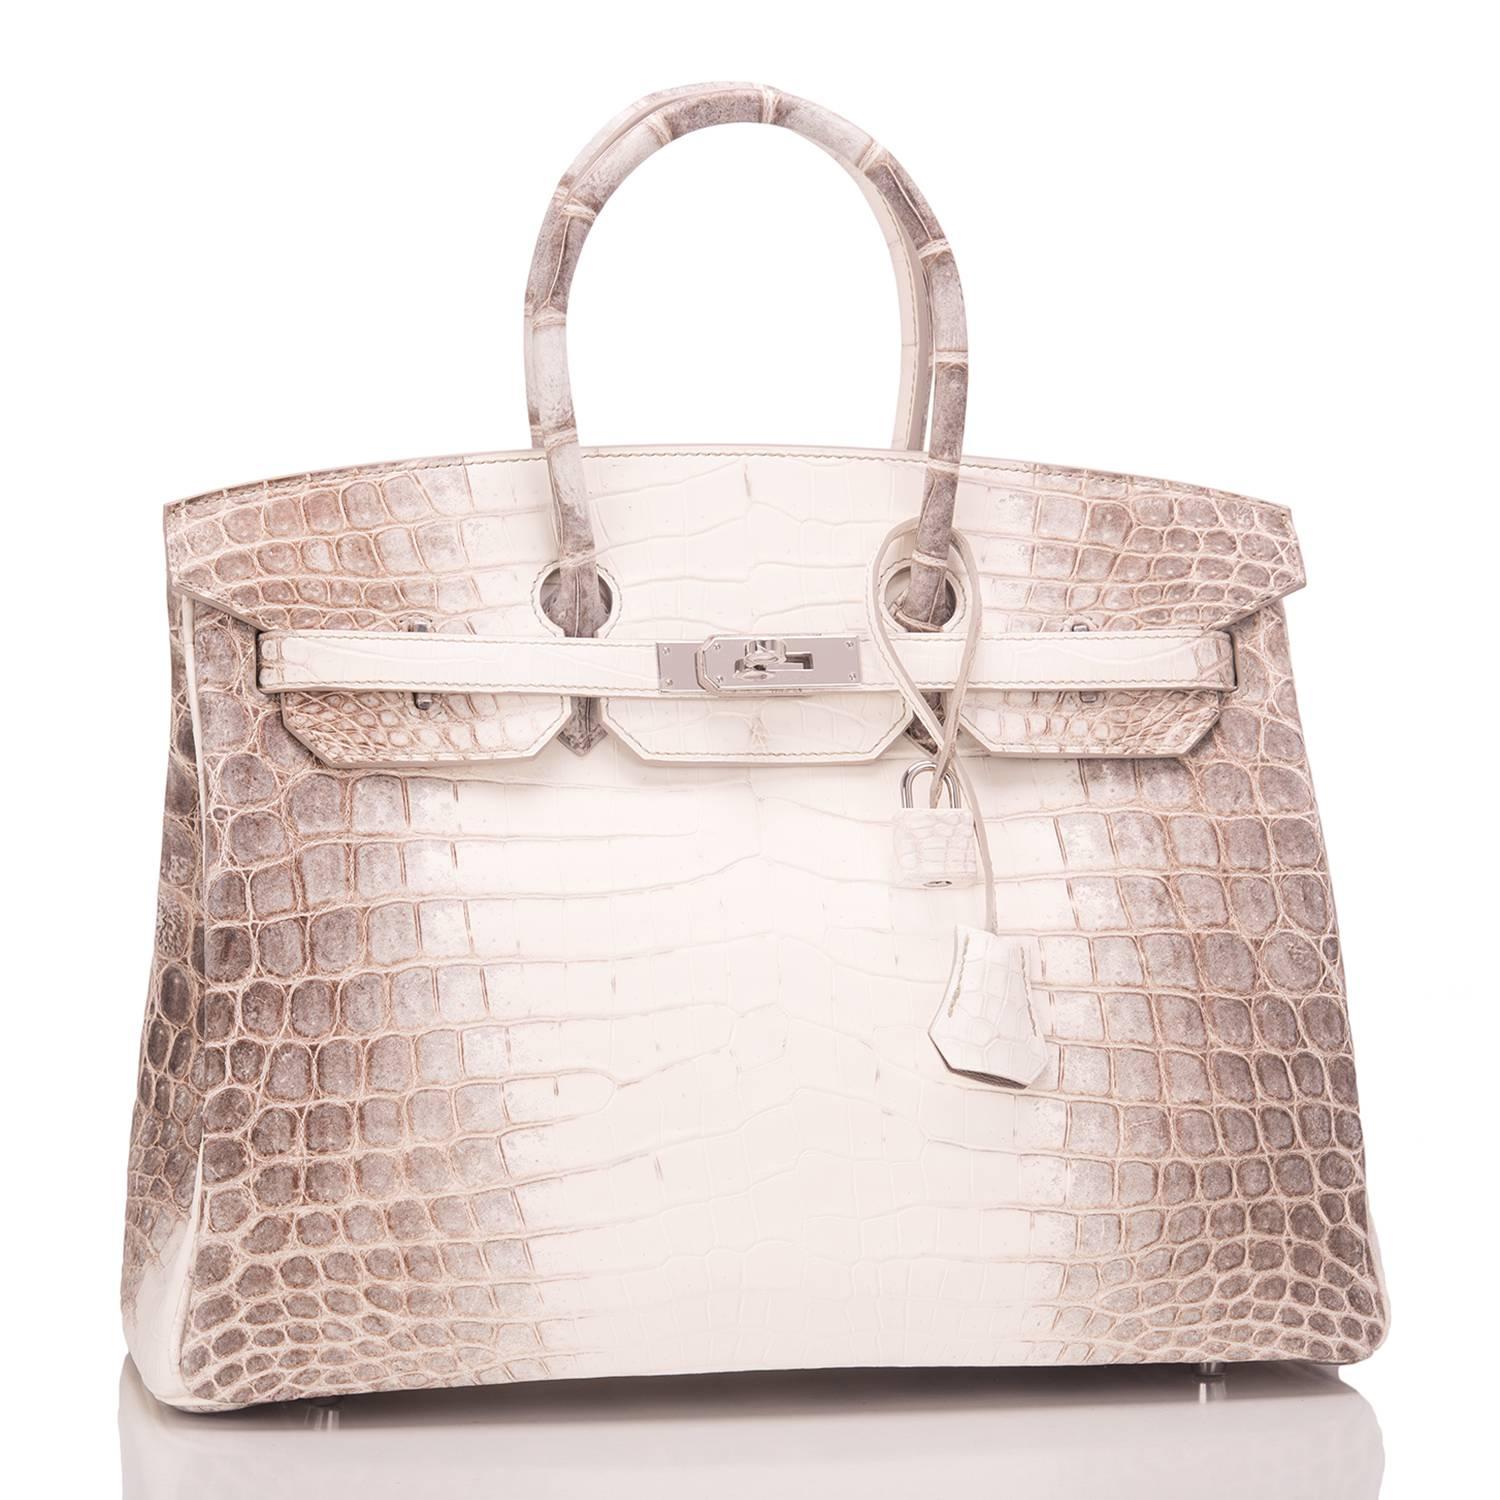 Hermes Himalayan 35cm Birkin of white matte niloticus crocodile skin with palladium hardware.

This rare Himalayan features tonal stitching, a front toggle closure, a clochette with lock and two keys, and double rolled handles.

The interior is